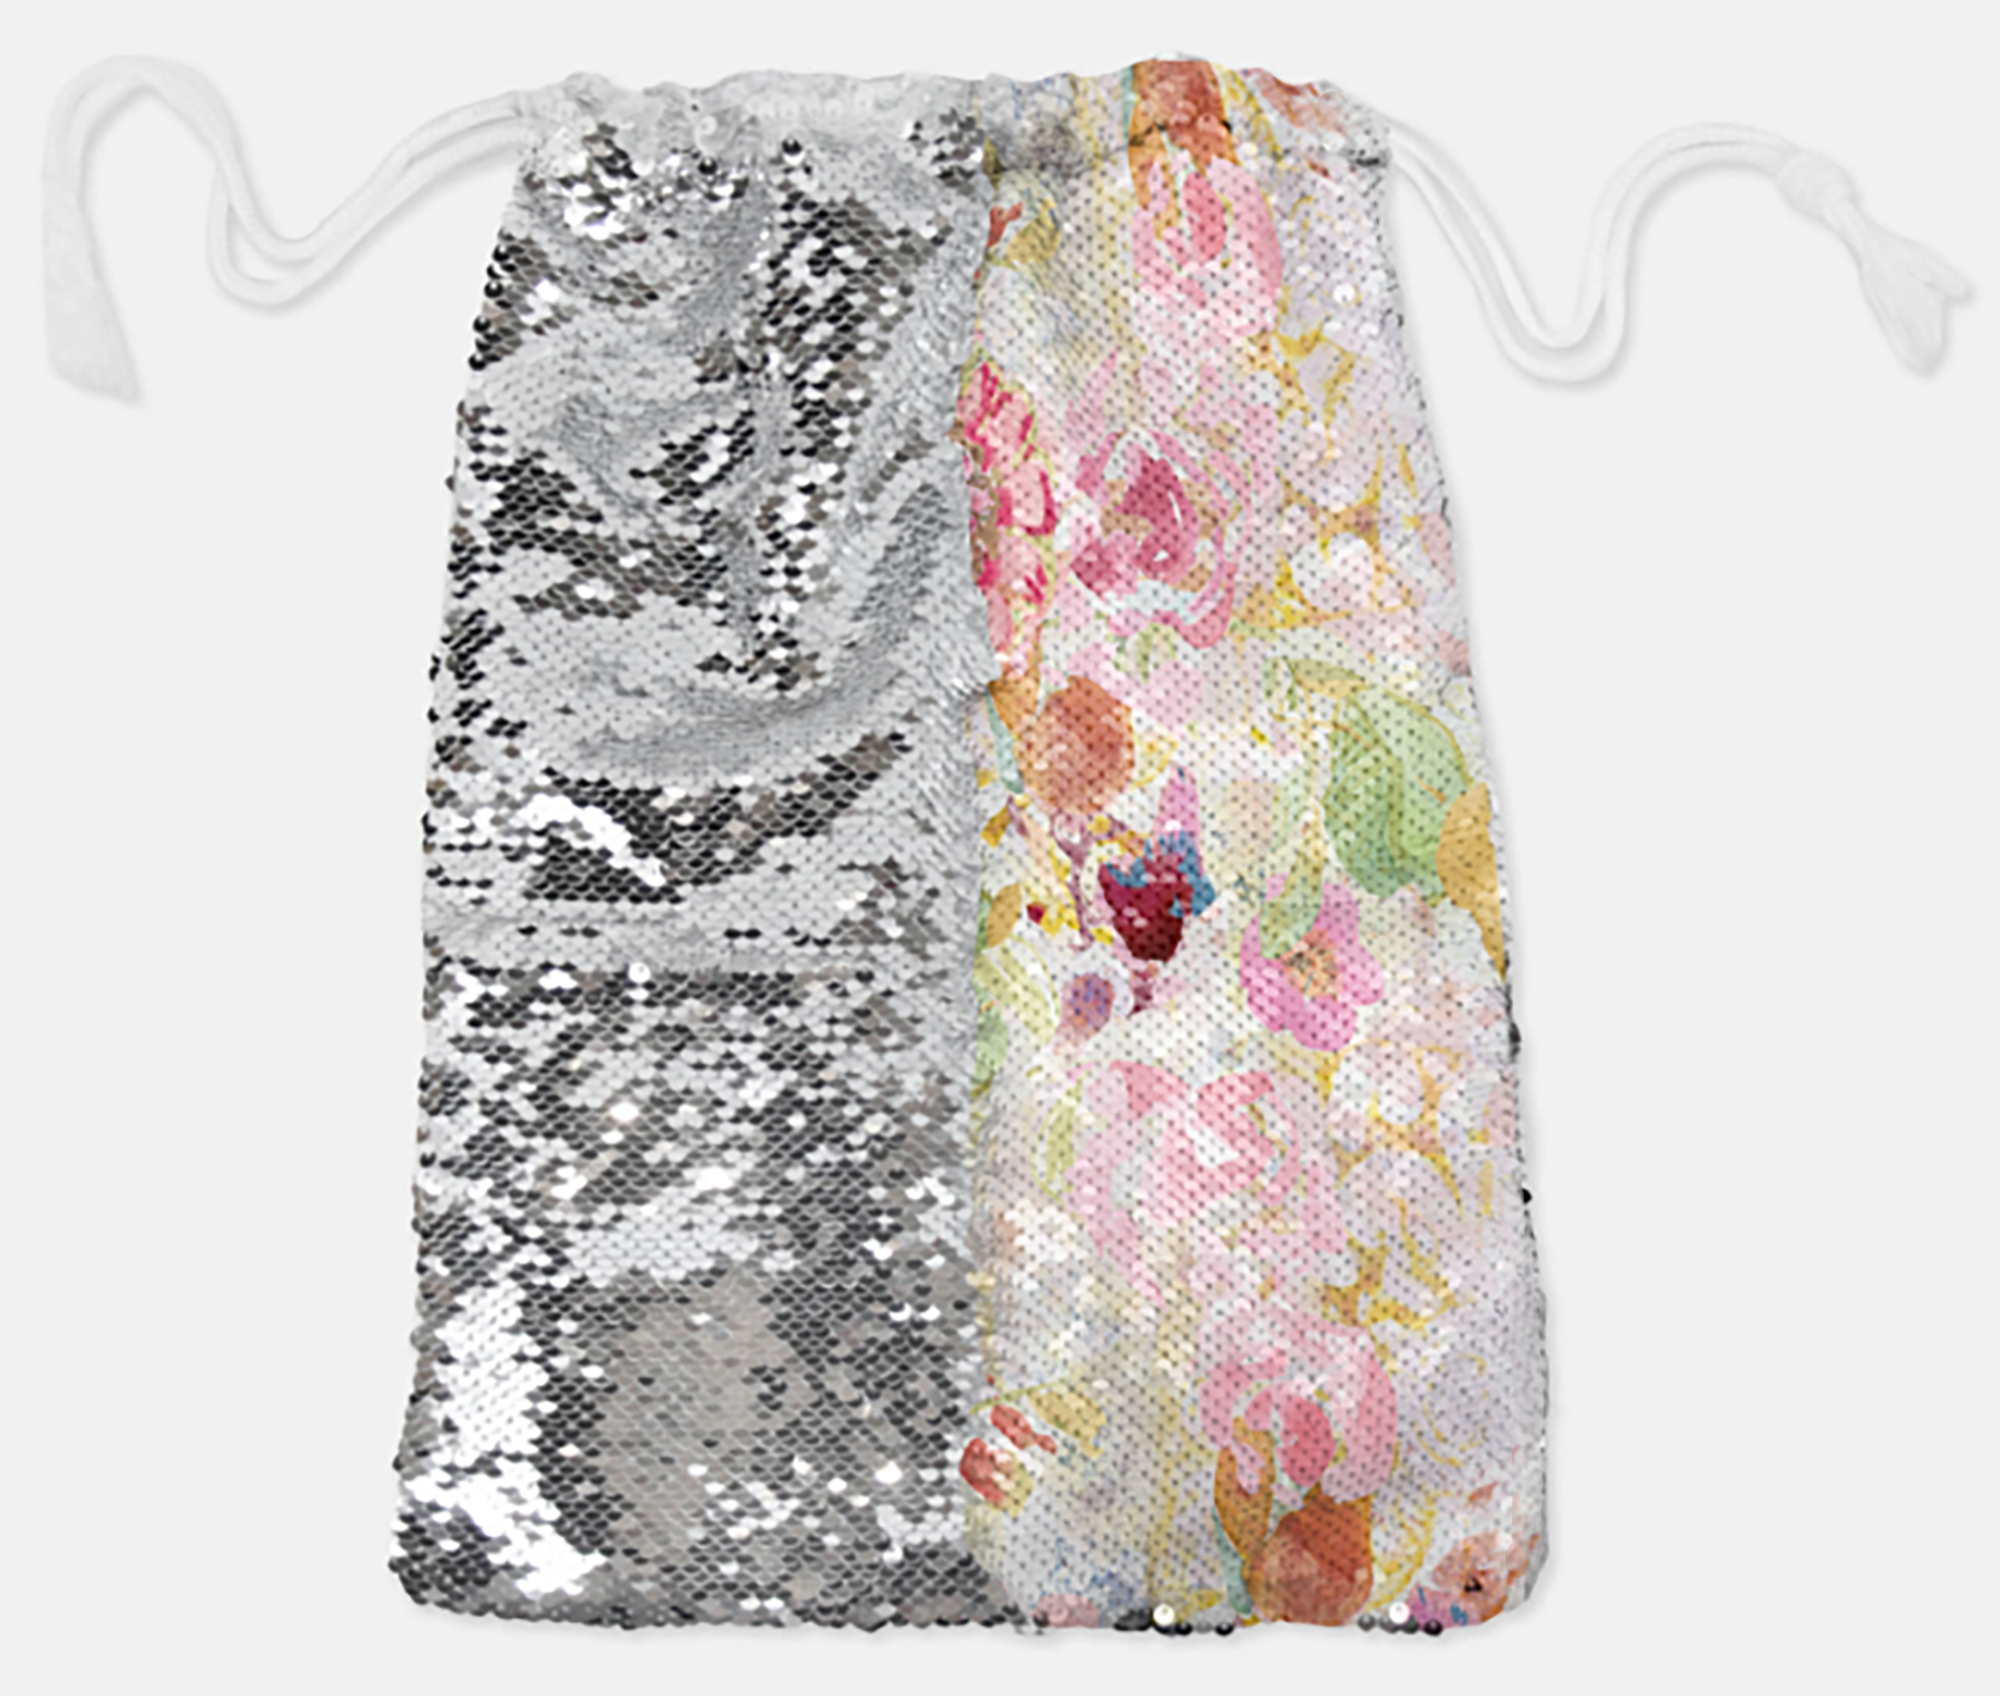 DRAWSTRING BAG - MOM'S PASTEL / SILVER SEQUINS - Dreams After All